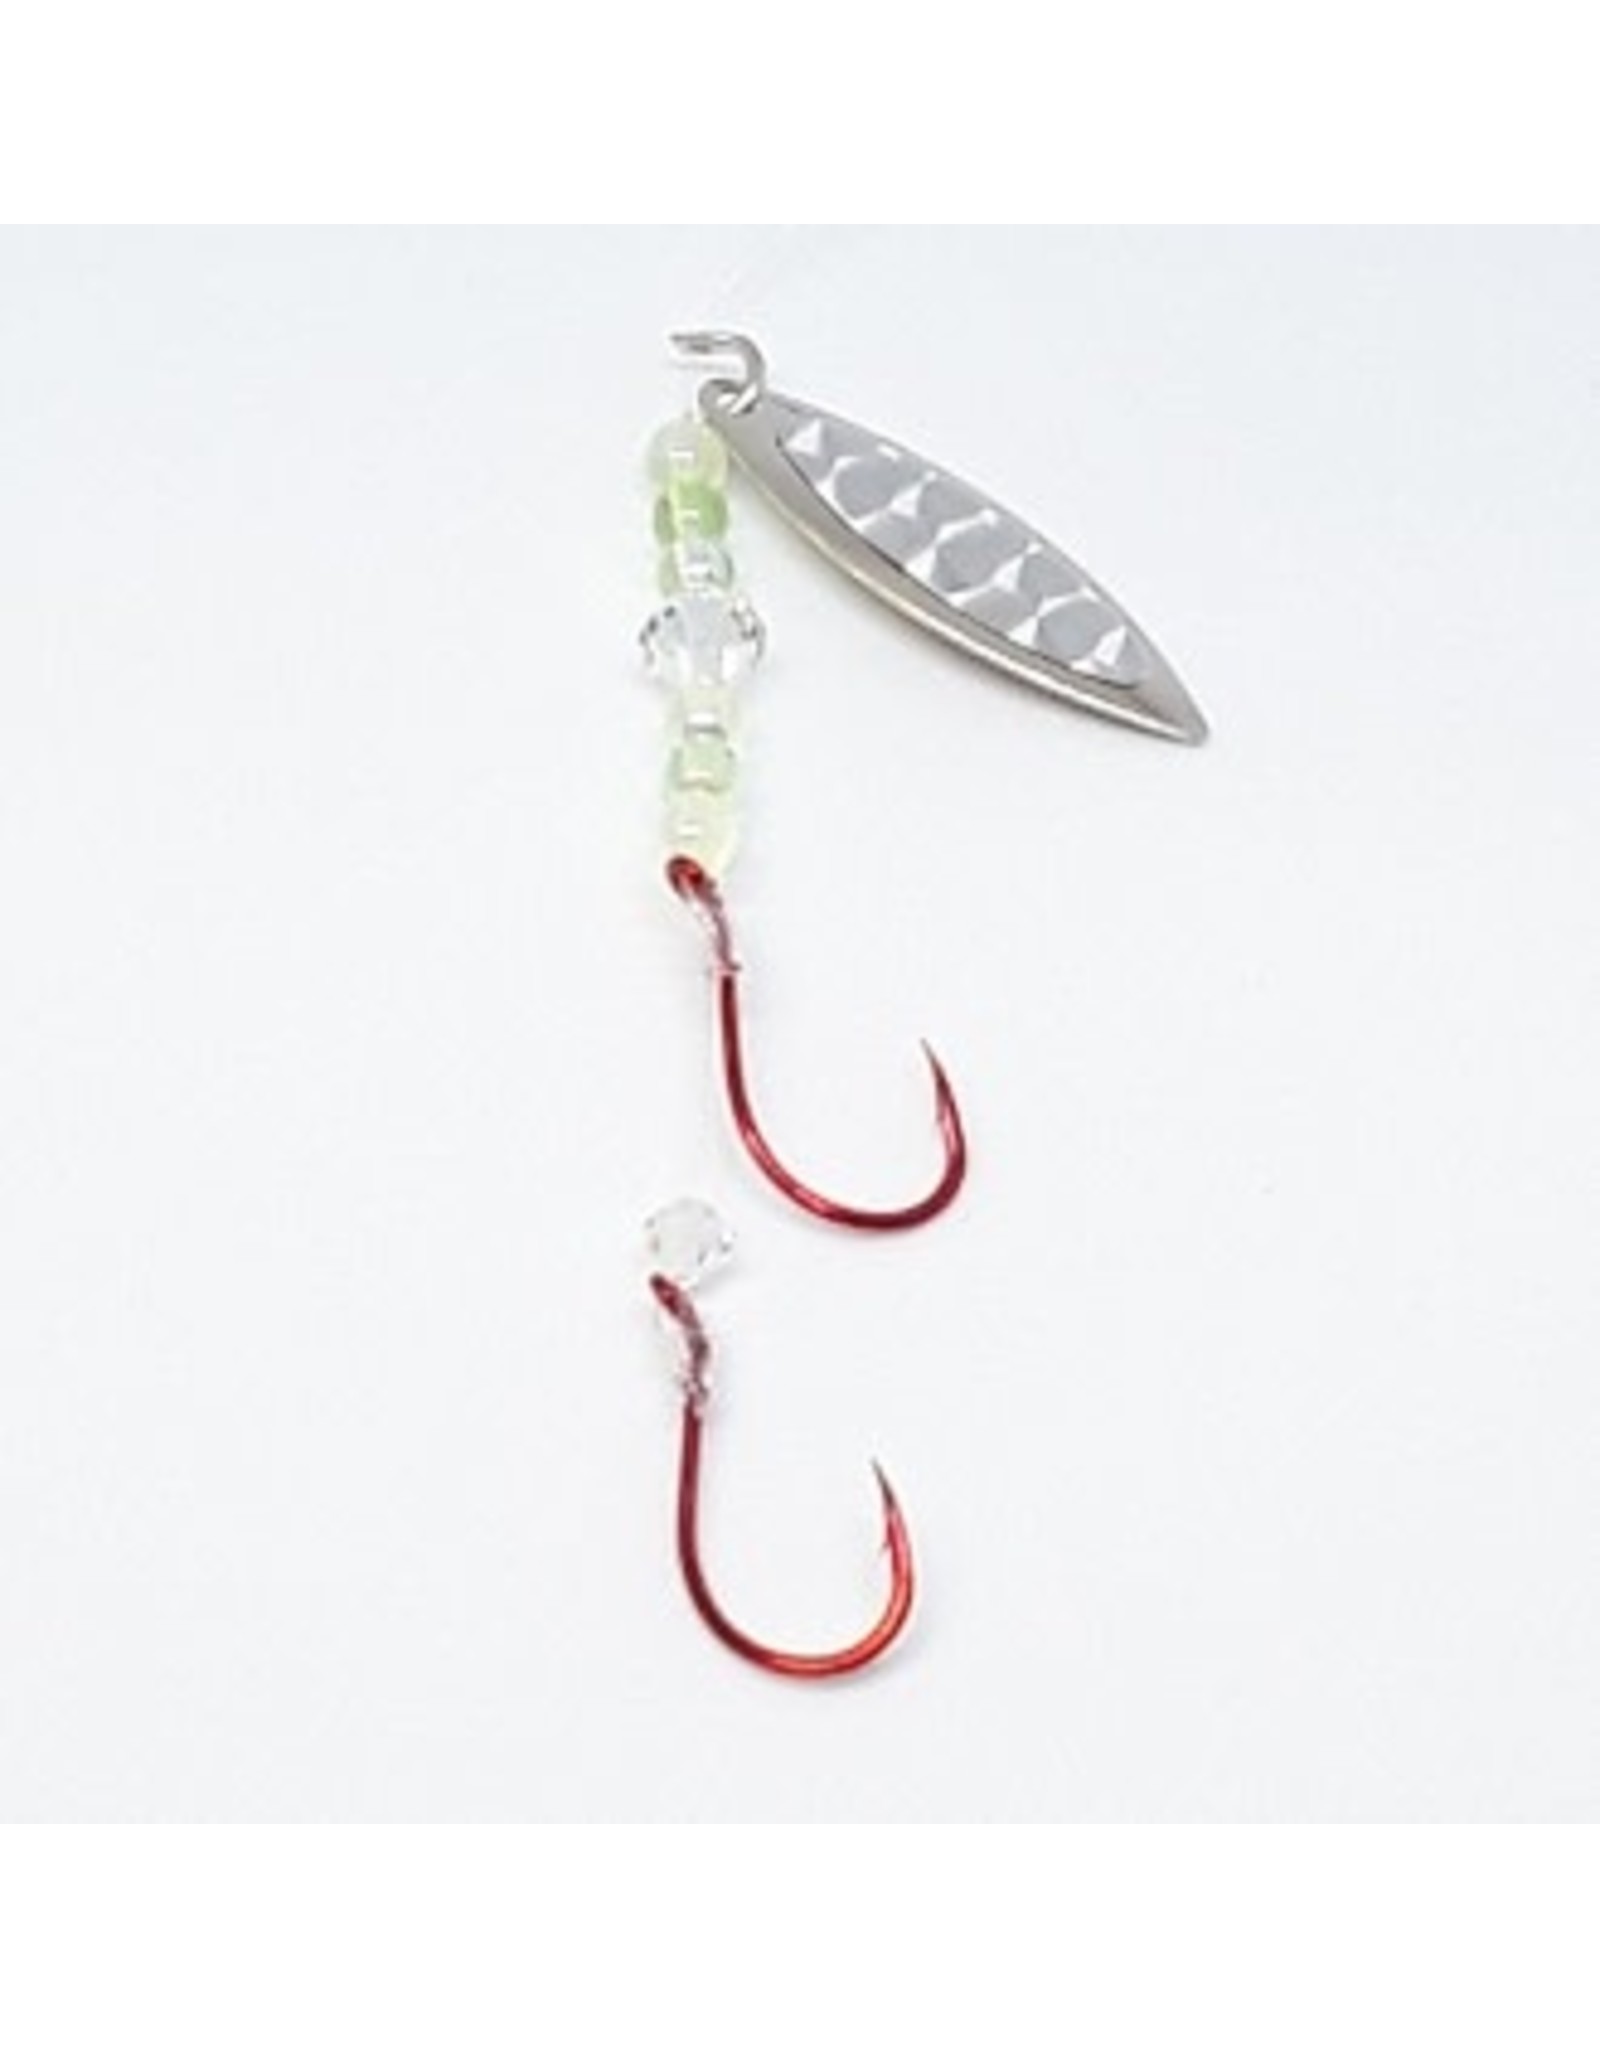 Kokabow Fishing Tackle Spinner - Silver Bullet - Larry's Sporting Goods